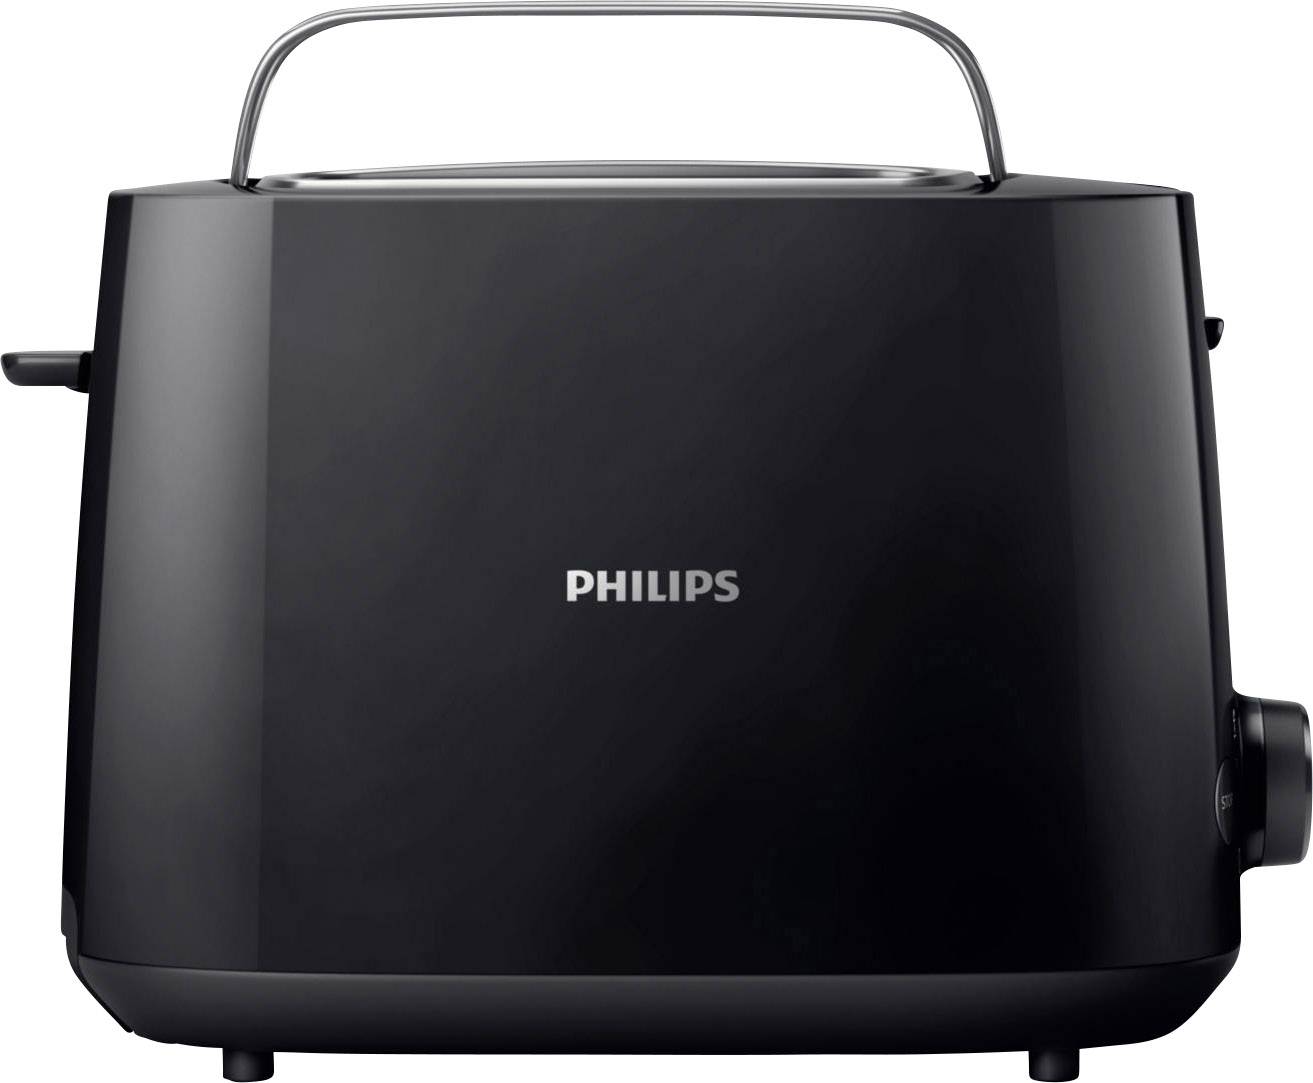 Philips HD2581/90 Toaster with home baking Black | Conrad.com